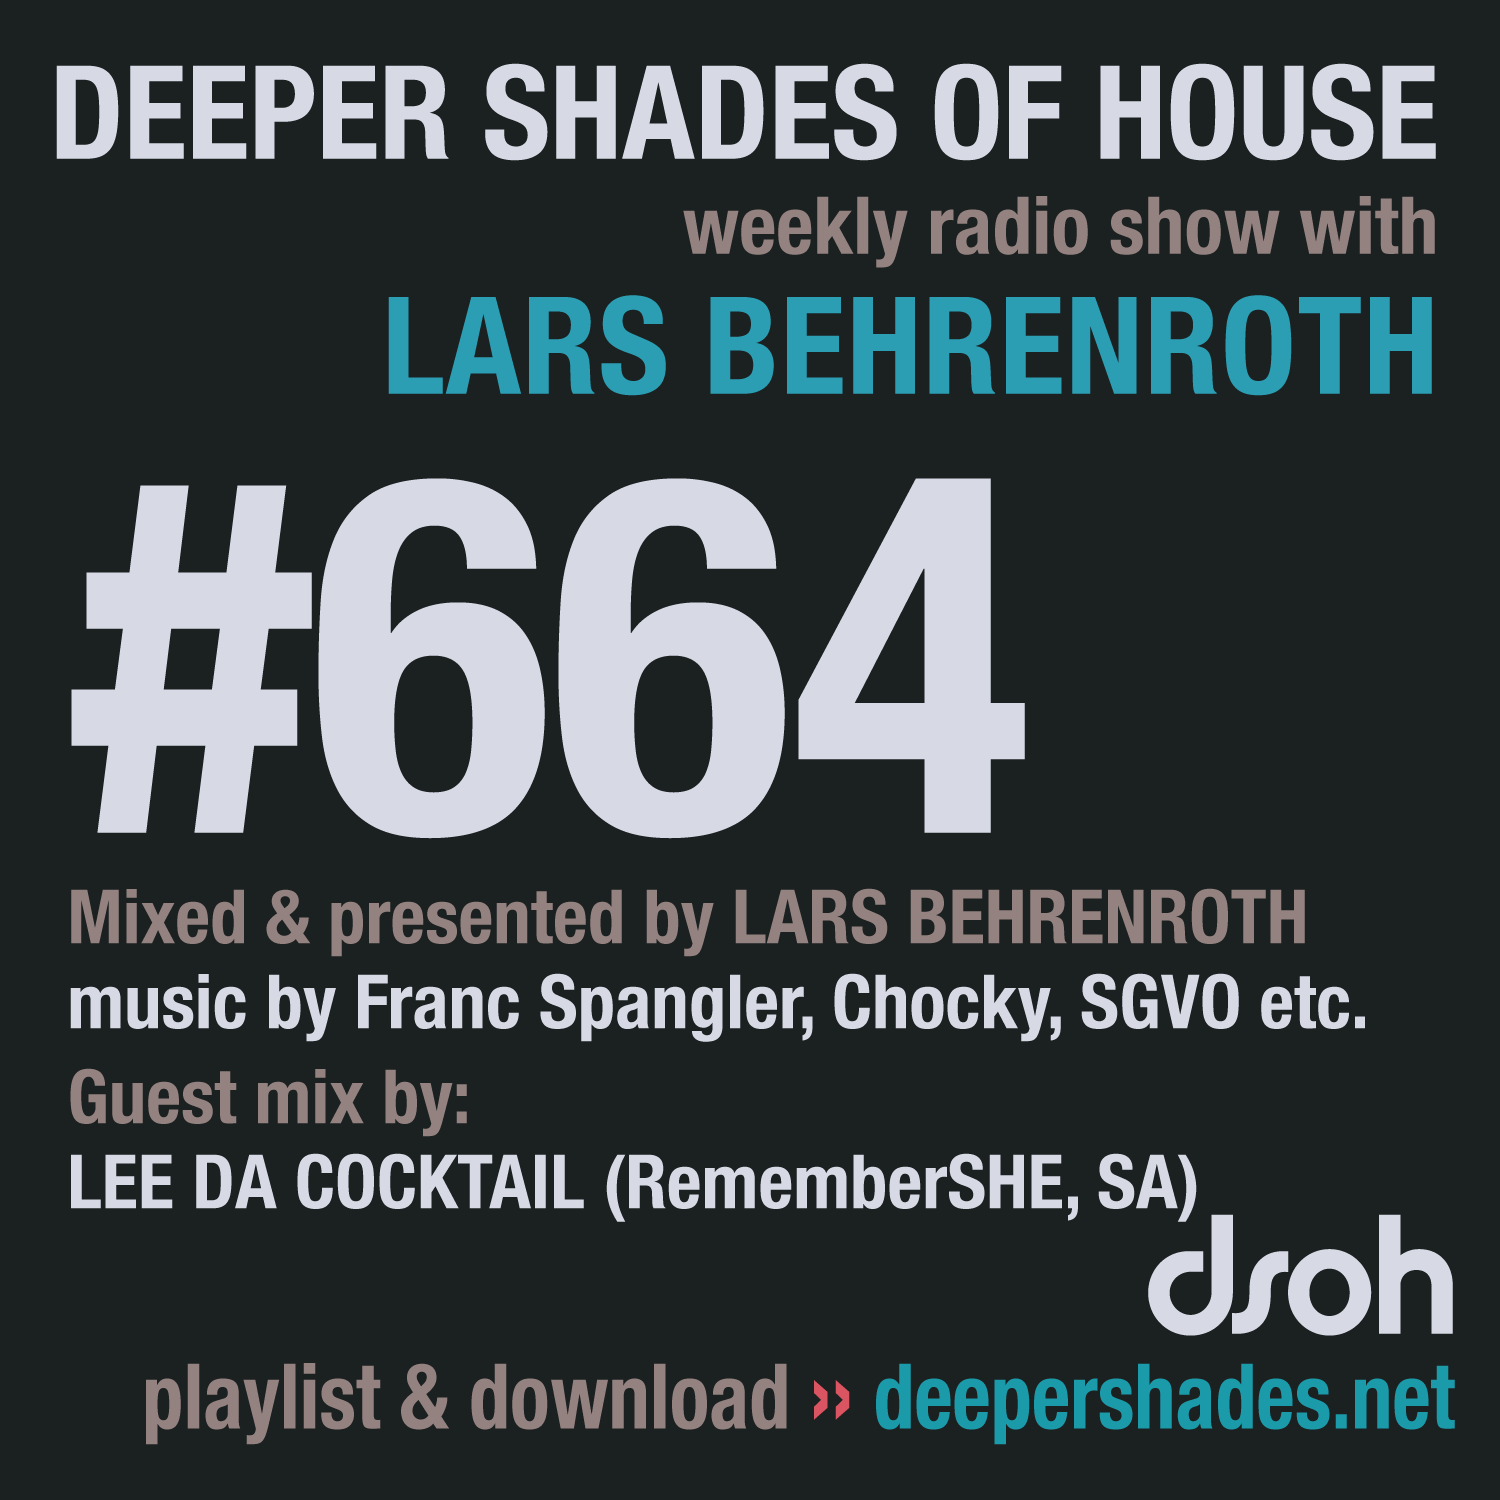 Deeper Shades Of House 664